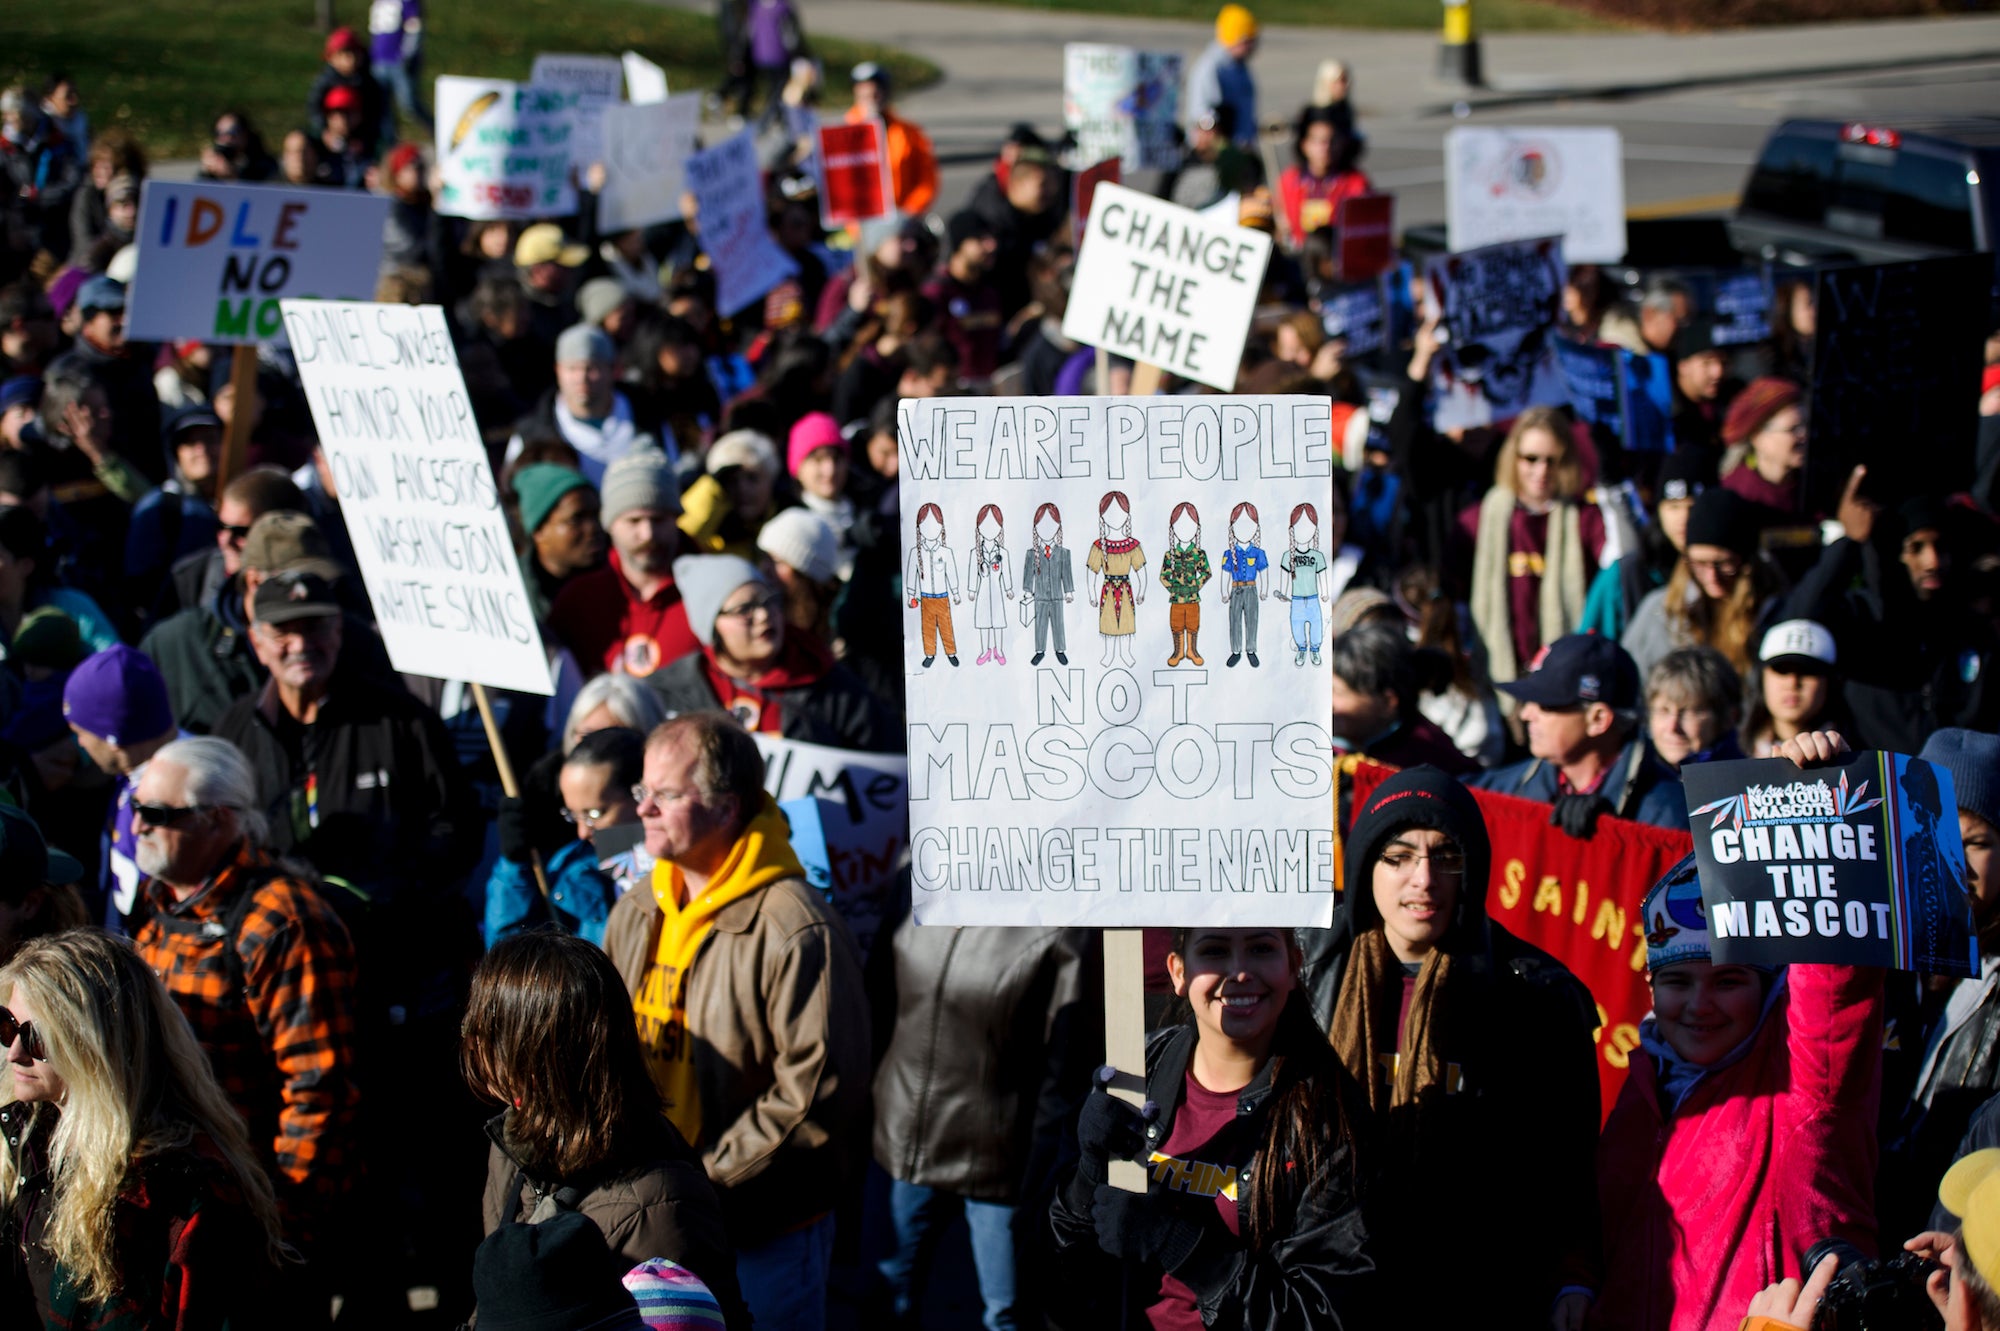 People march to protest against the Washington NFL team in Minneapolis, Minnesota.